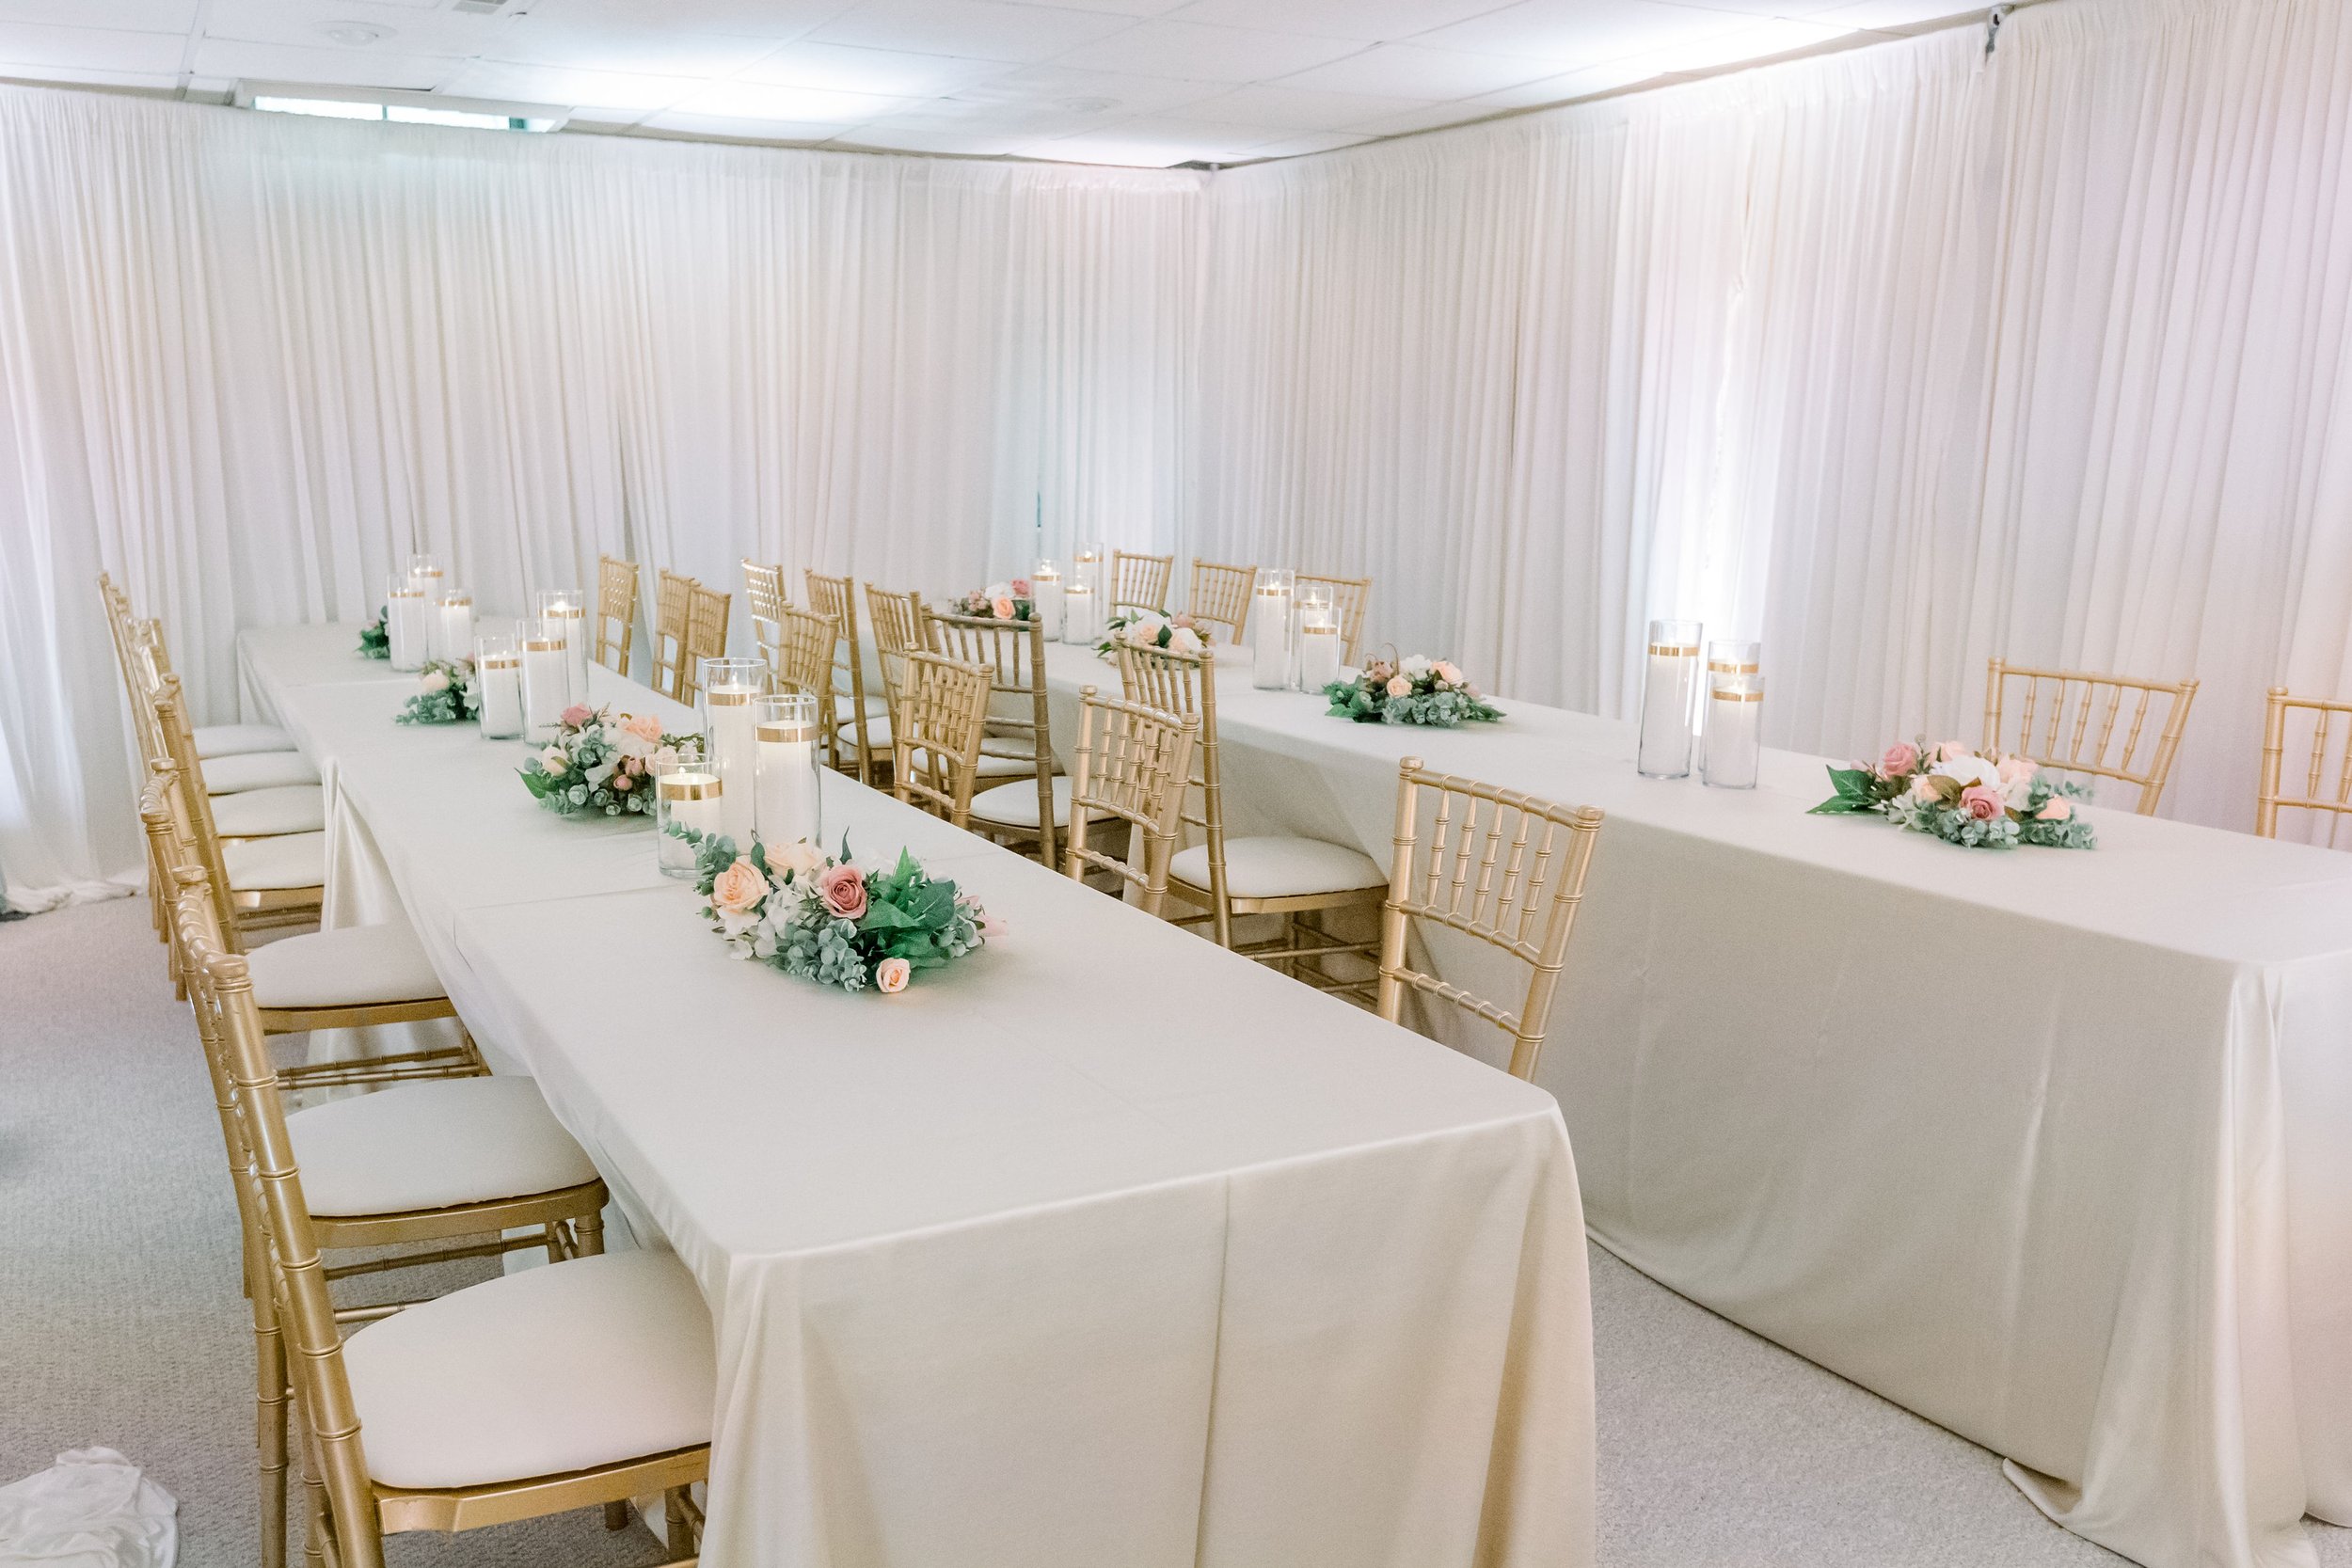 Basement wall draping wedding in the living room garage wall draping intimate wedding at home micro wedding event in chicago chiavari chairs table renta (1).jpg